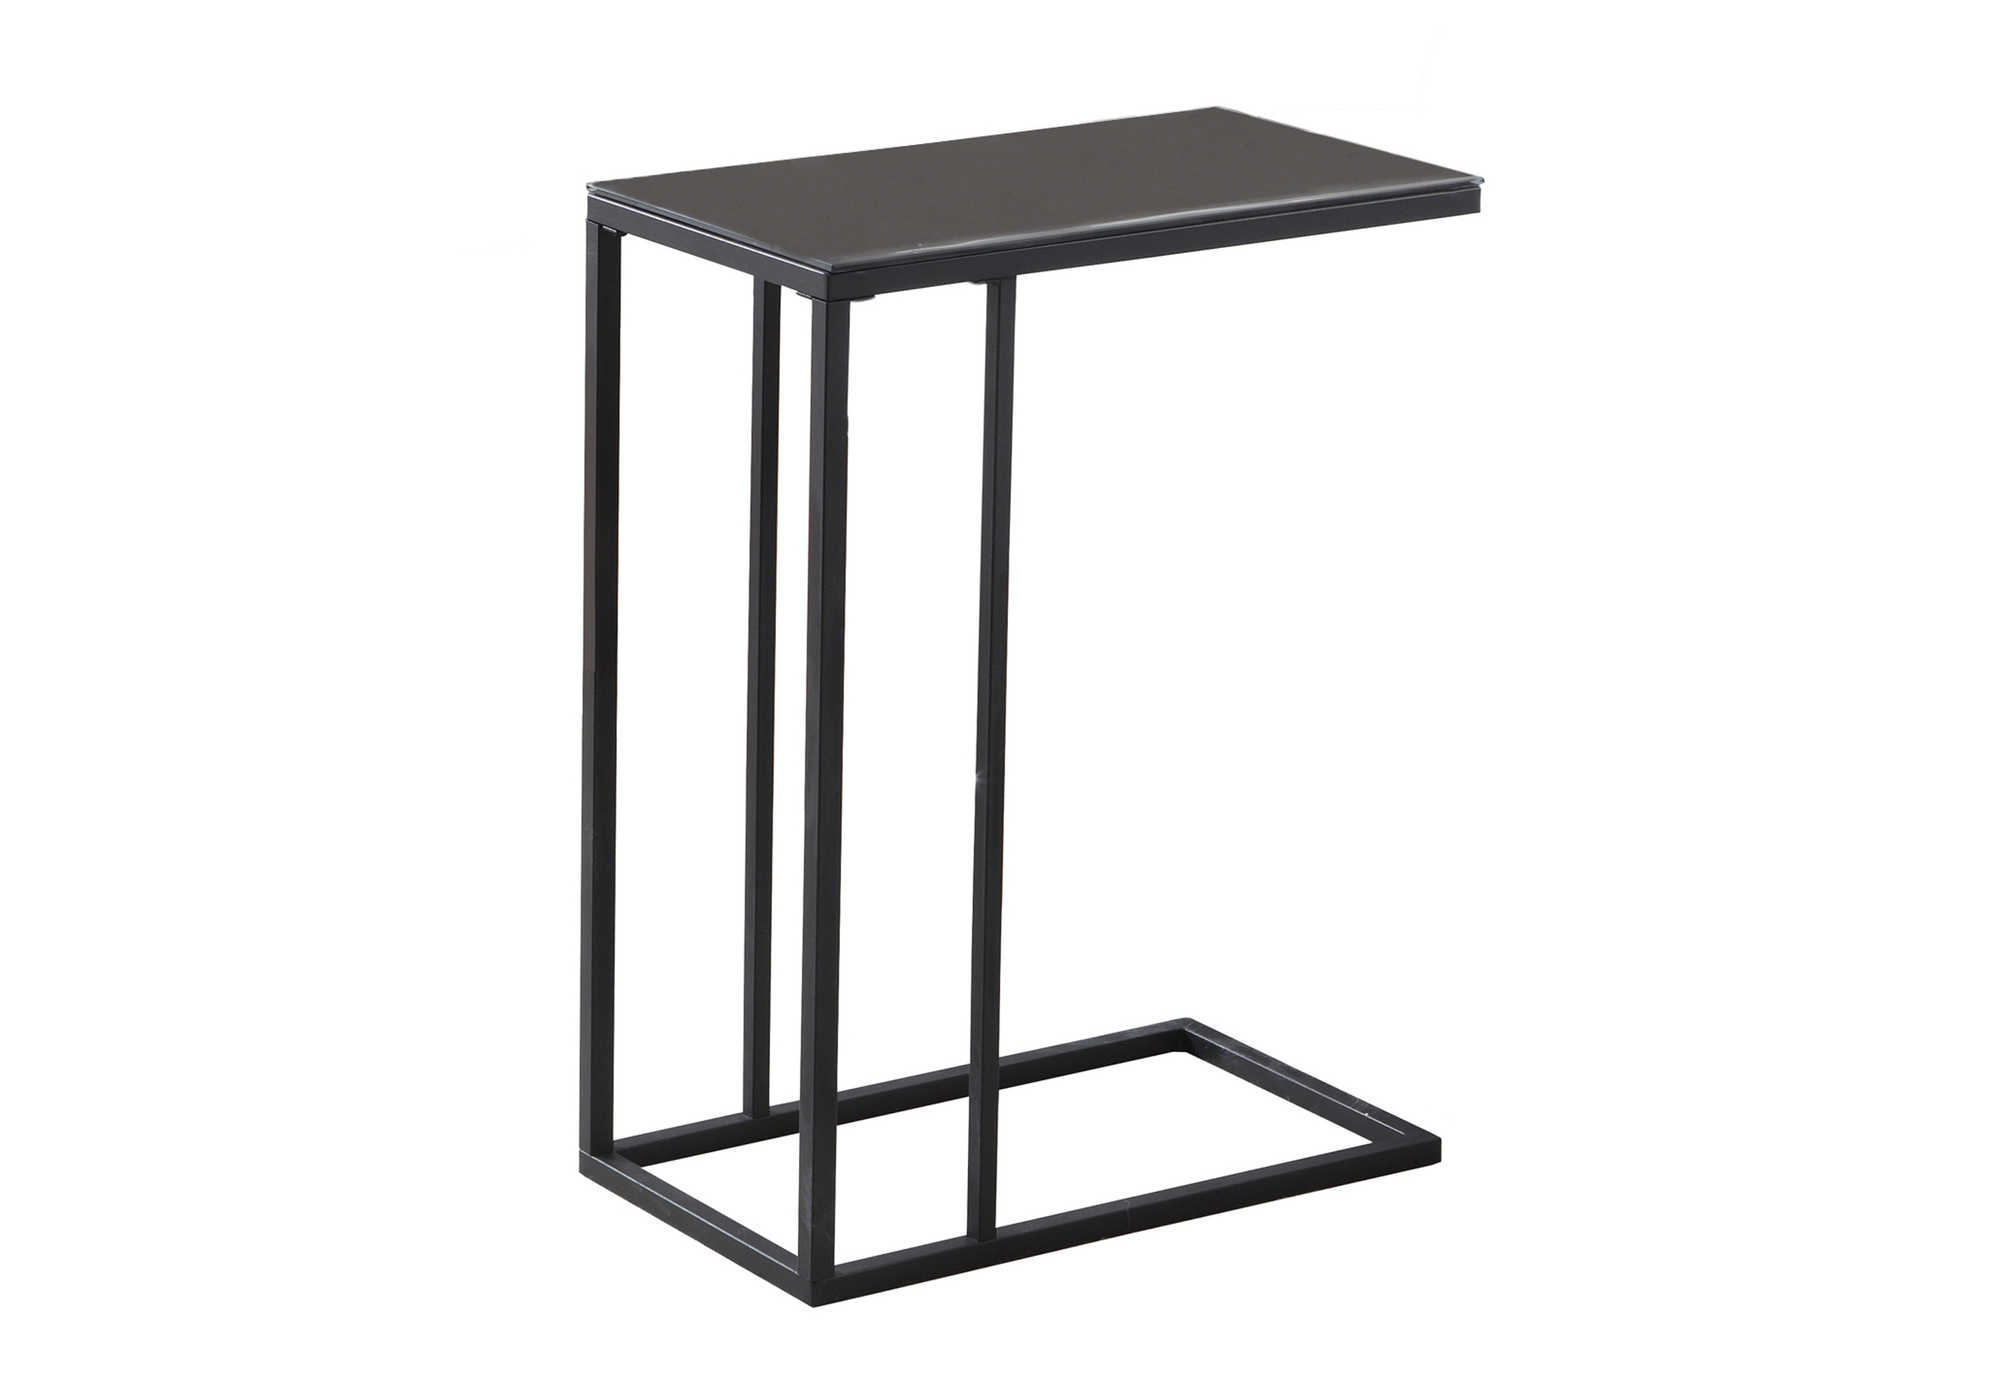 BEDROOM ACCENT TABLE - BLACK METAL / BLACK TEMPERED GLASS